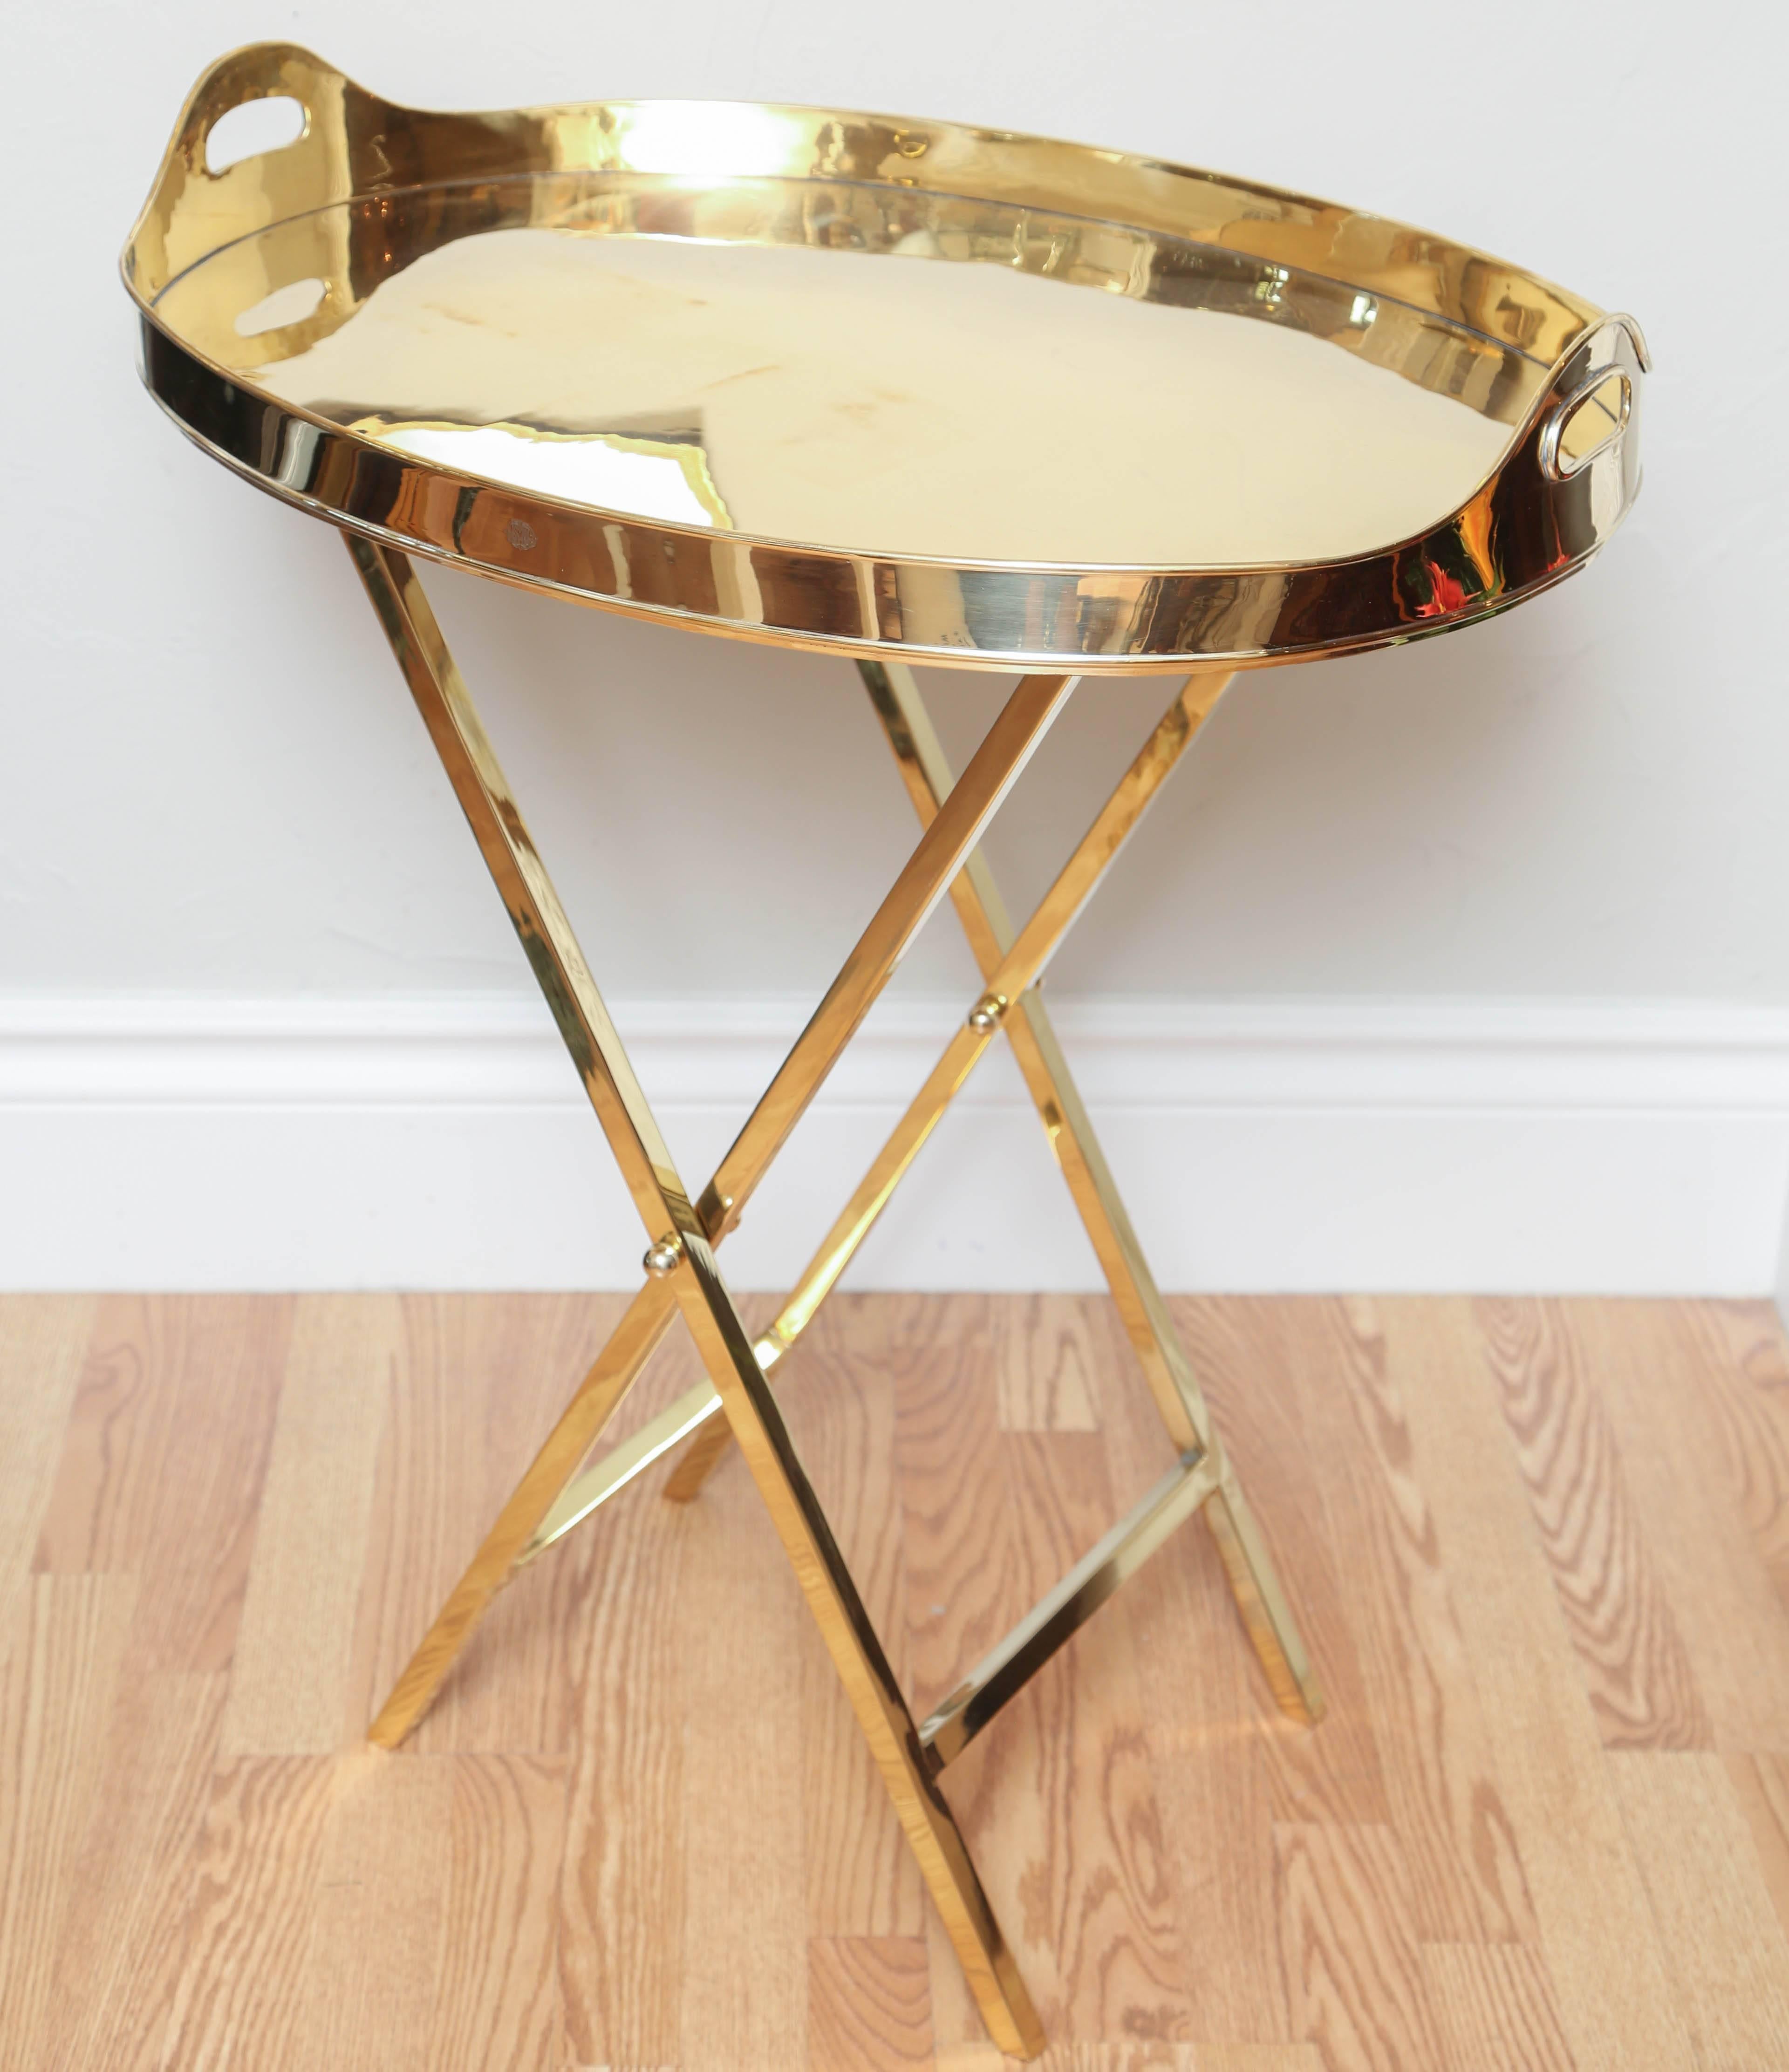 Large polished removable brass tray on matching stand.